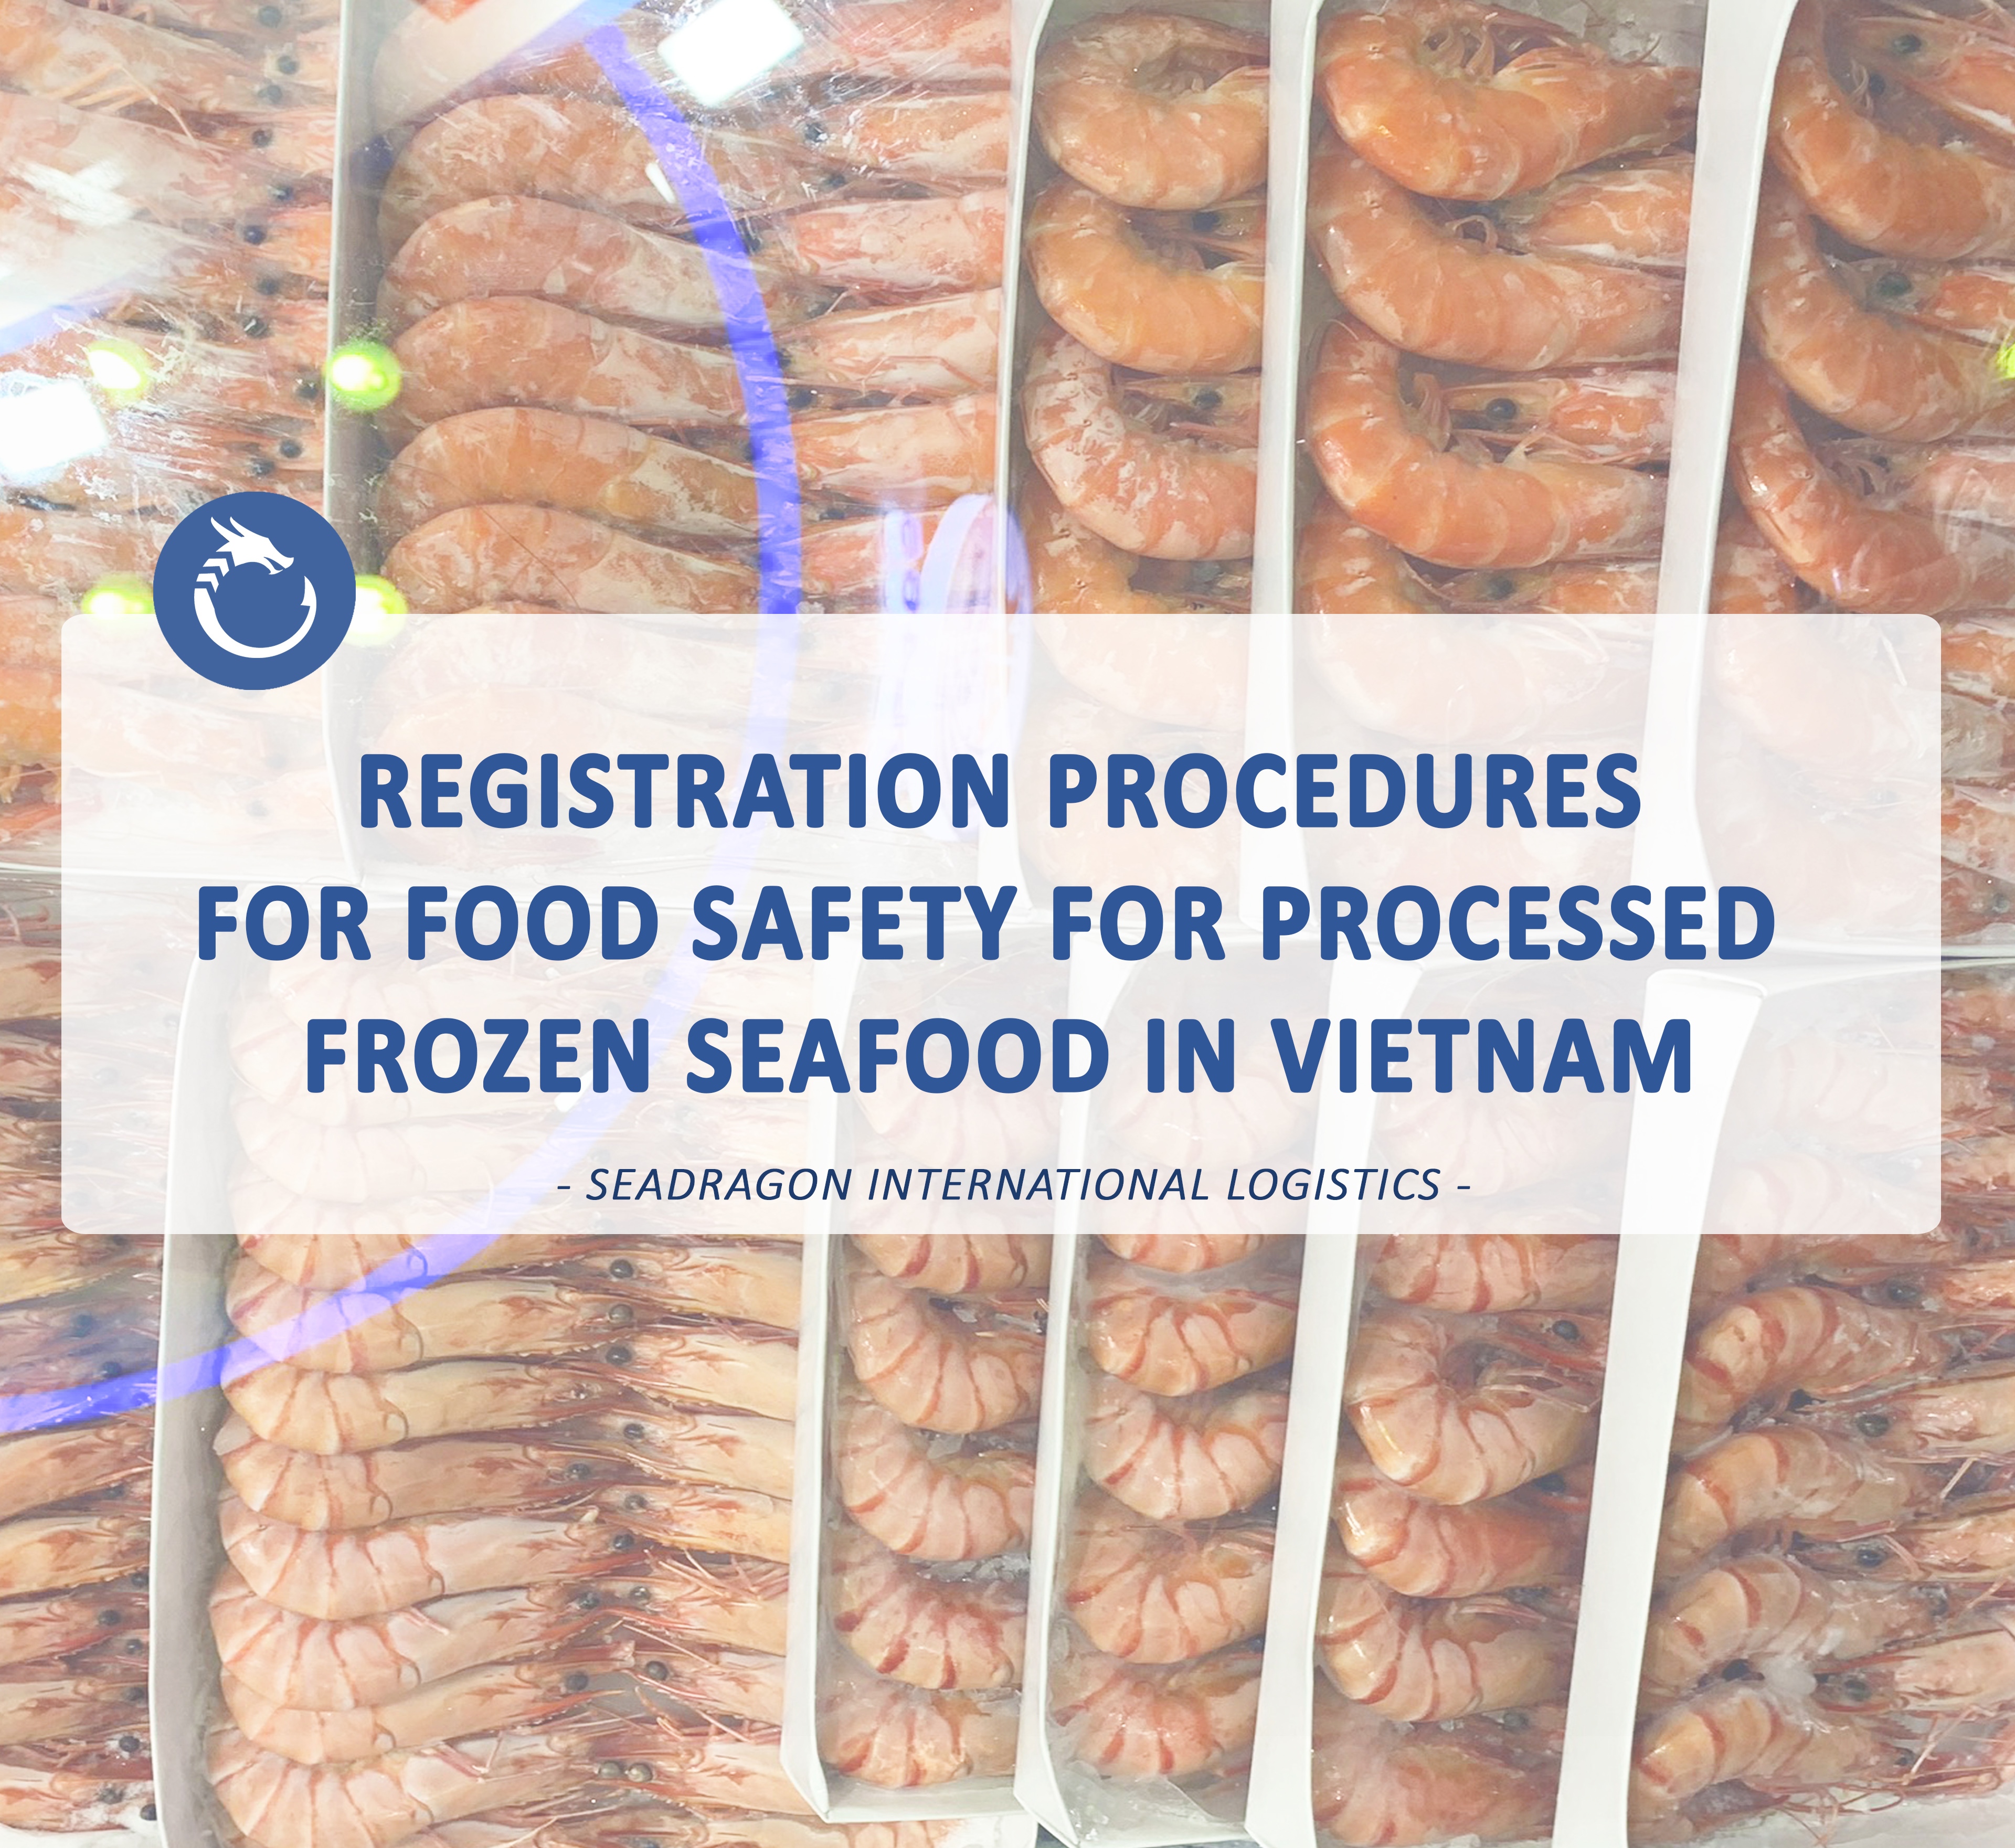 PROCEDURES REGISTRATION FOR FOOD SAFETY FOR PROCESSED FROZEN SEAFOOD IN VIETNAM